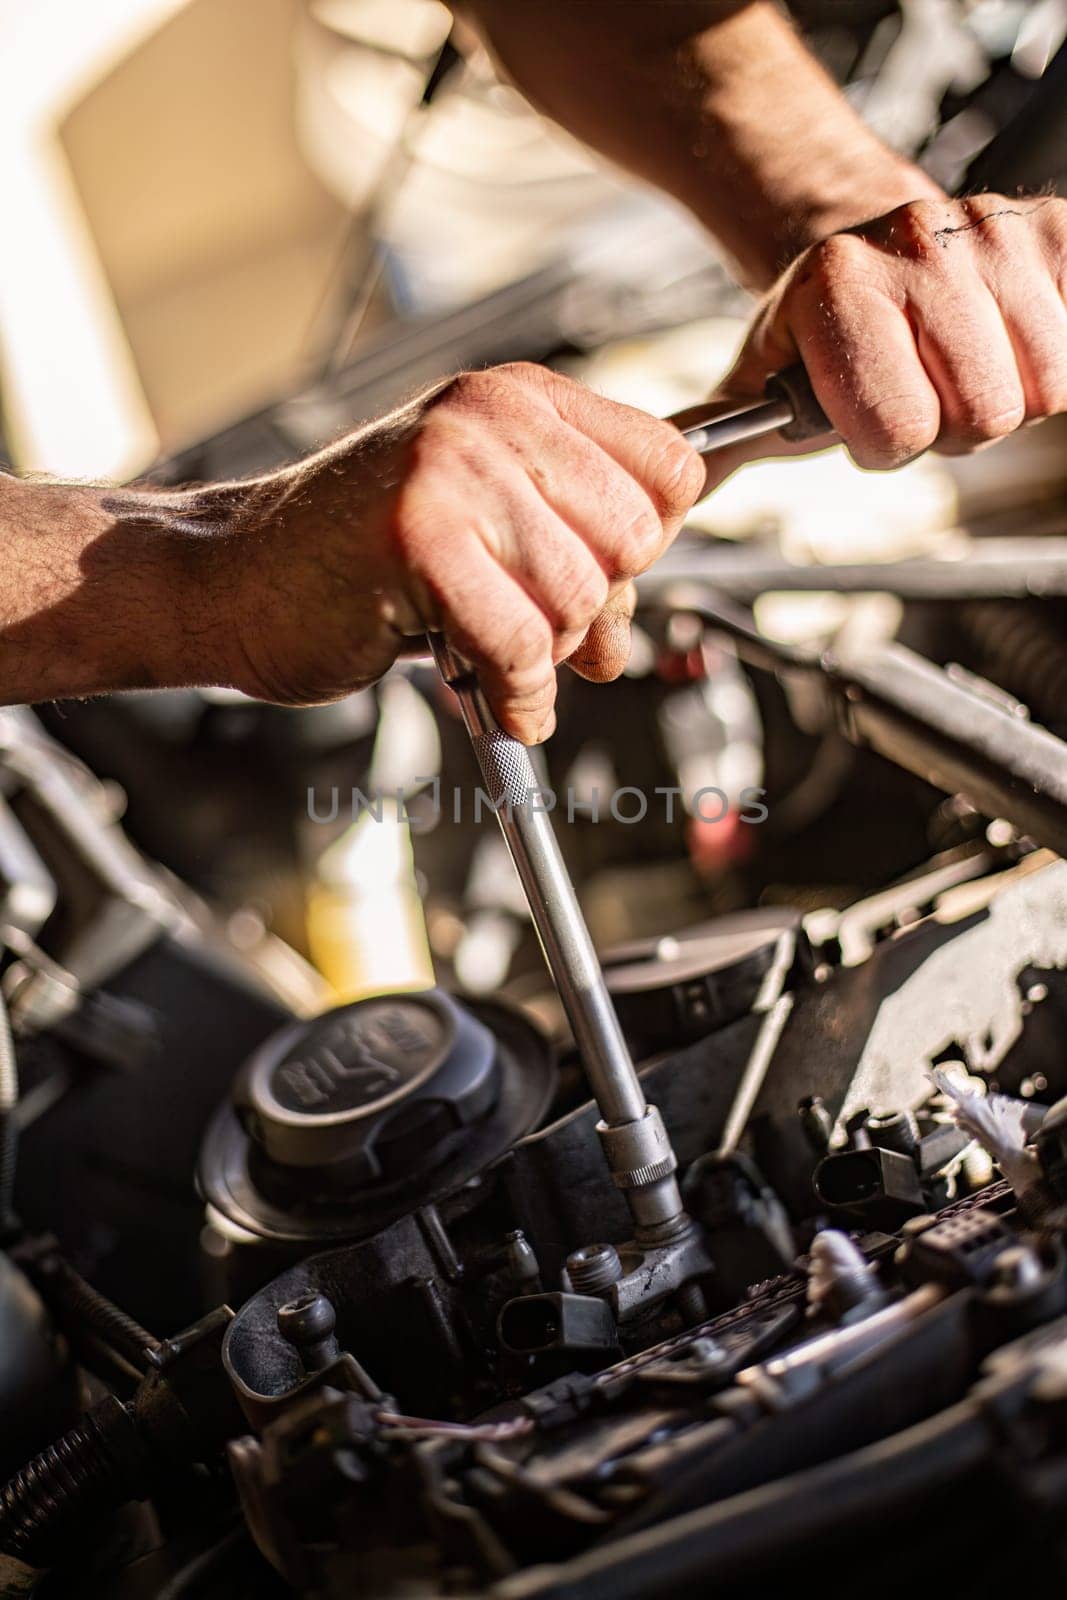 Milan, Italy 9 April 2024: Close-up of a mechanic's dirty hands while repairing a car engine, showcasing hard work.